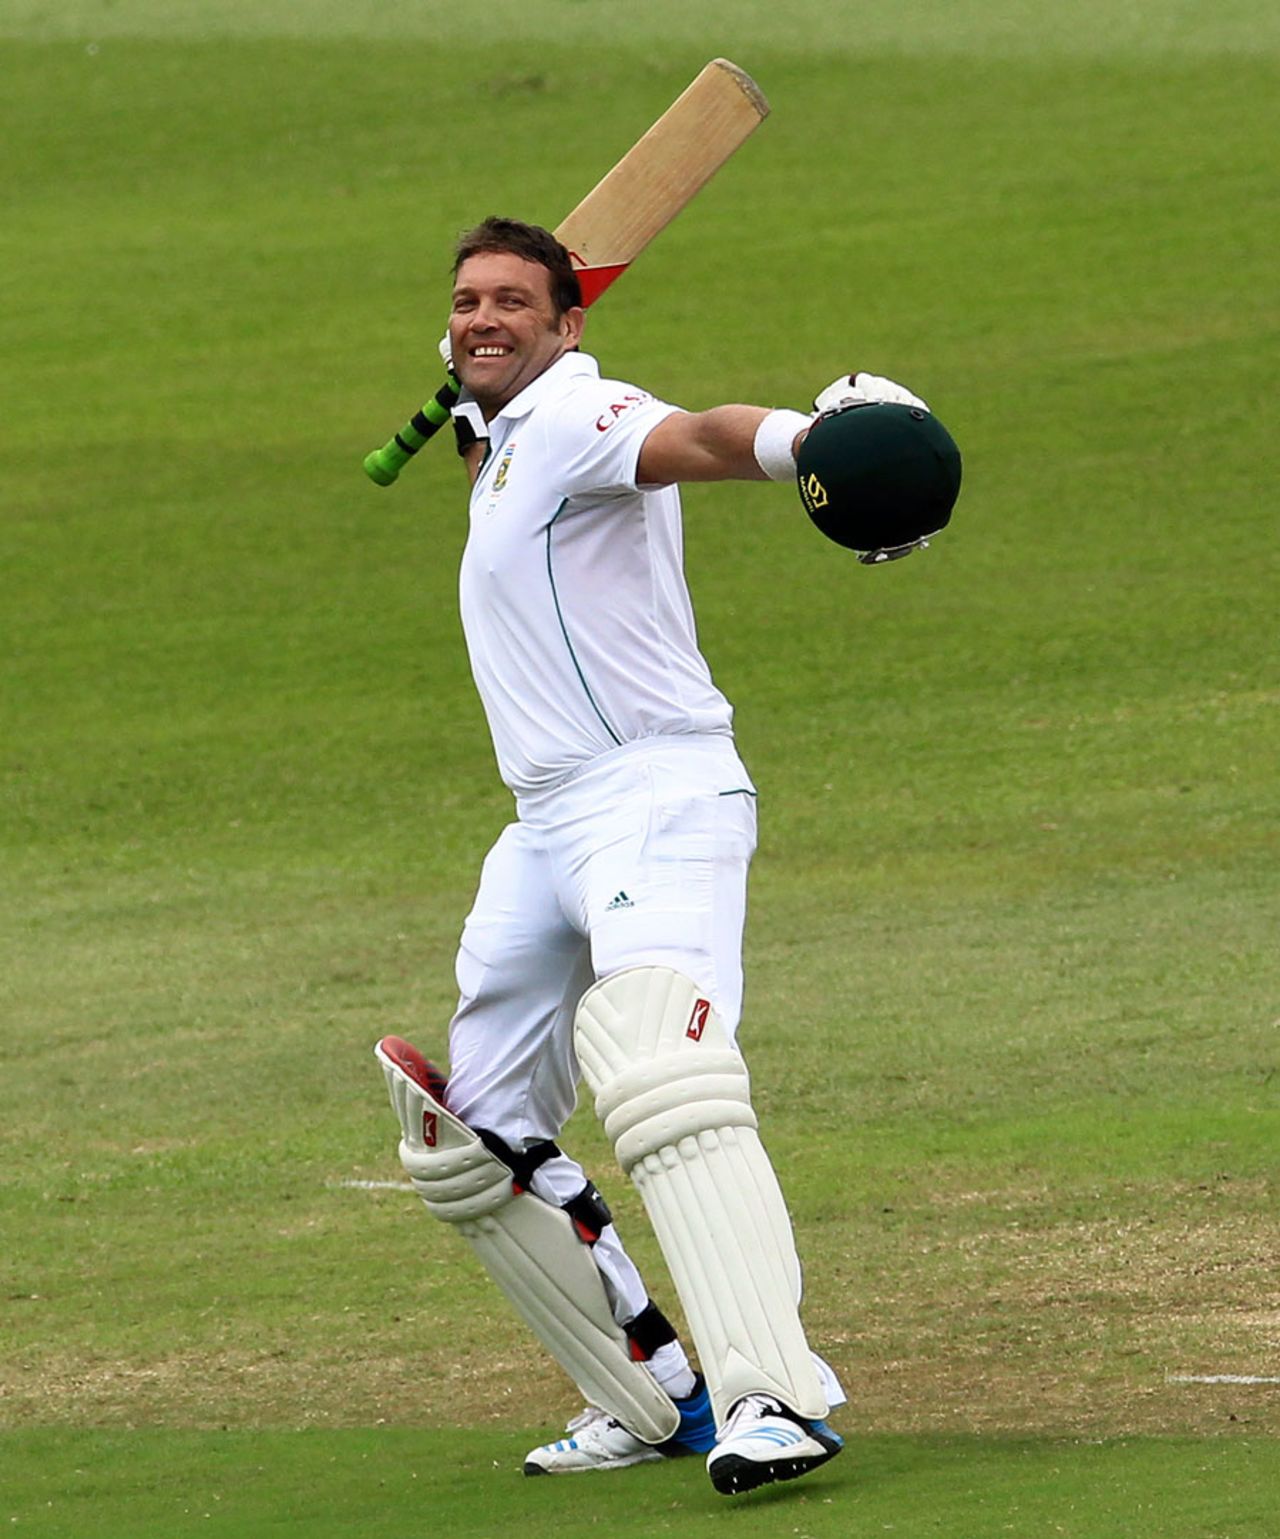 Jacques Kallis celebrates a century in his last Test, South Africa v India, 2nd Test, Durban, 4th day, December 29, 2013